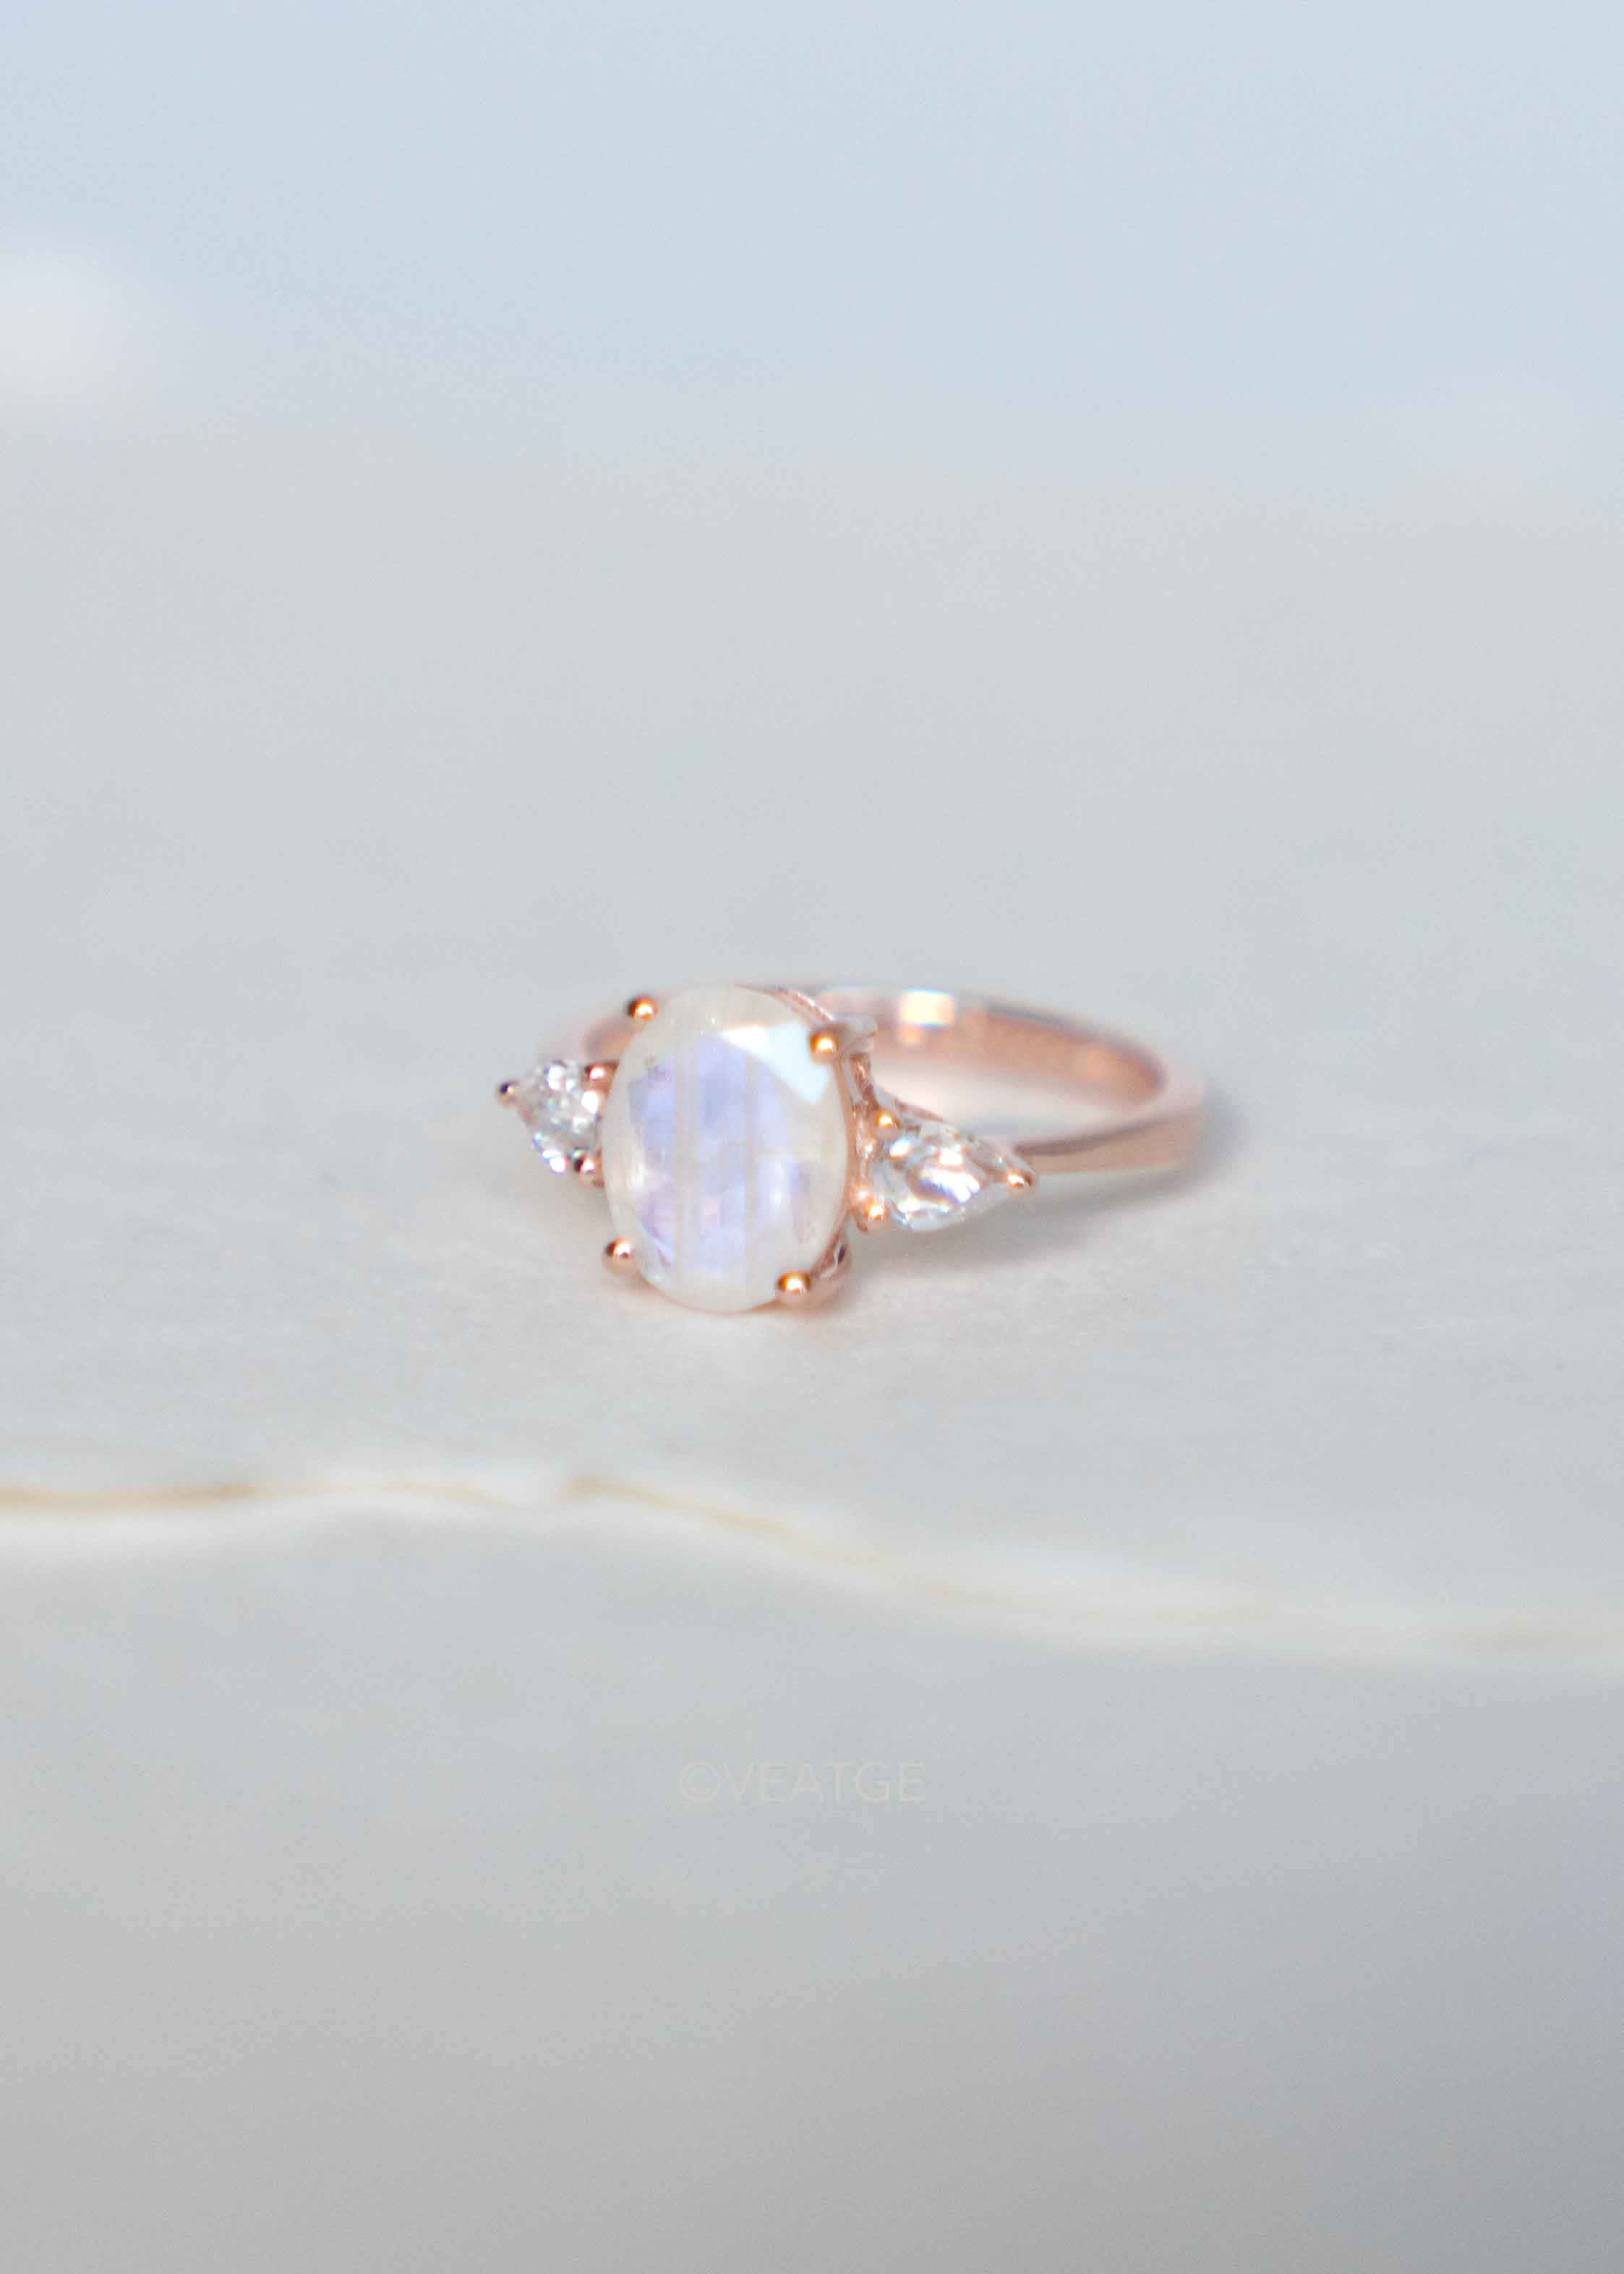 Moonstone Ring - Florence